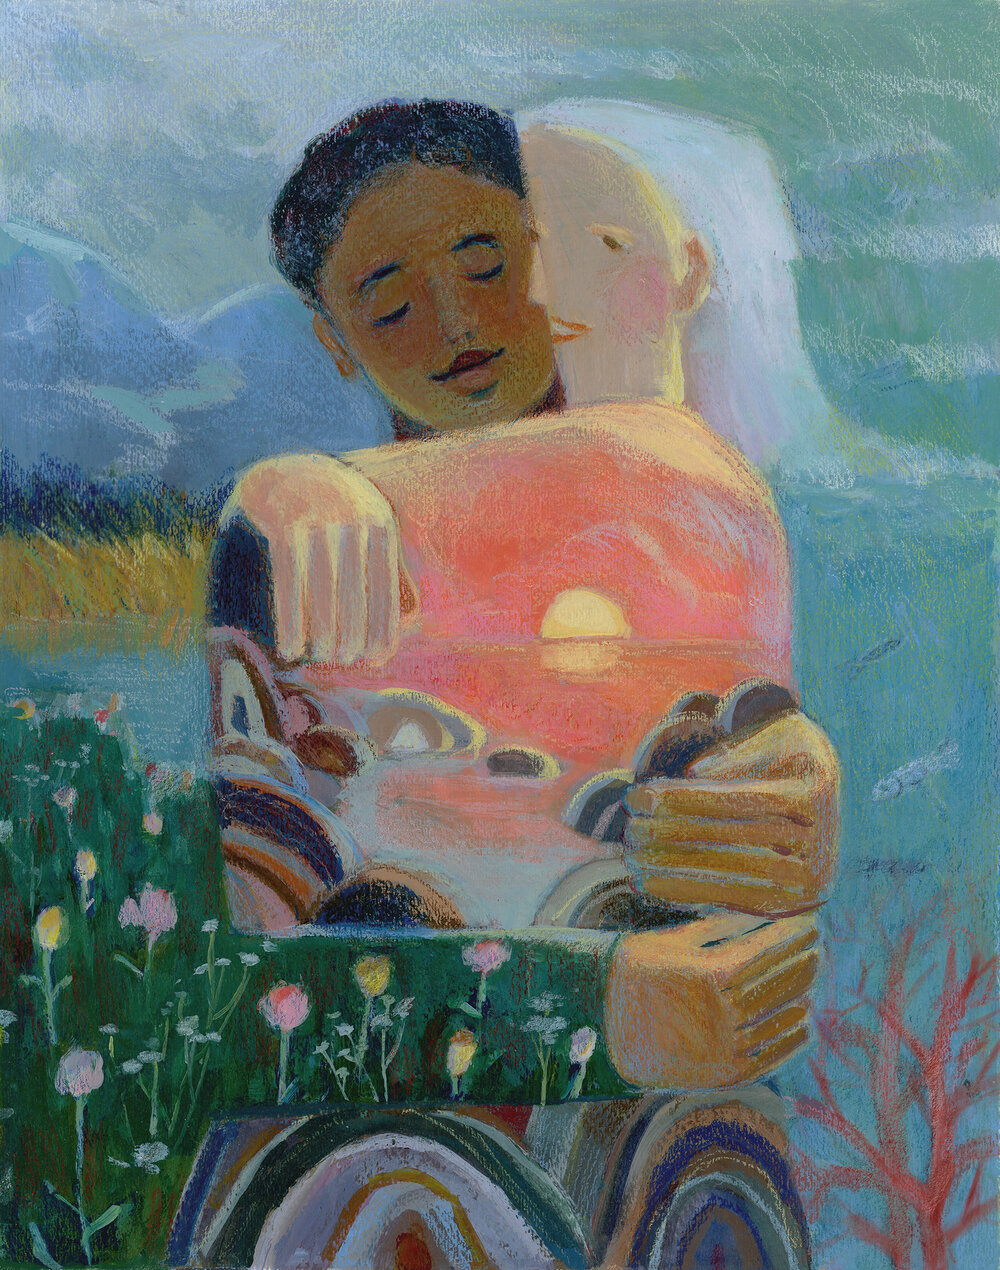 soft crayon or pastel drawing titled The Good Morrow of two women of different races embracing in a mountain lake landscape while another landscape forms their intertwined bodies